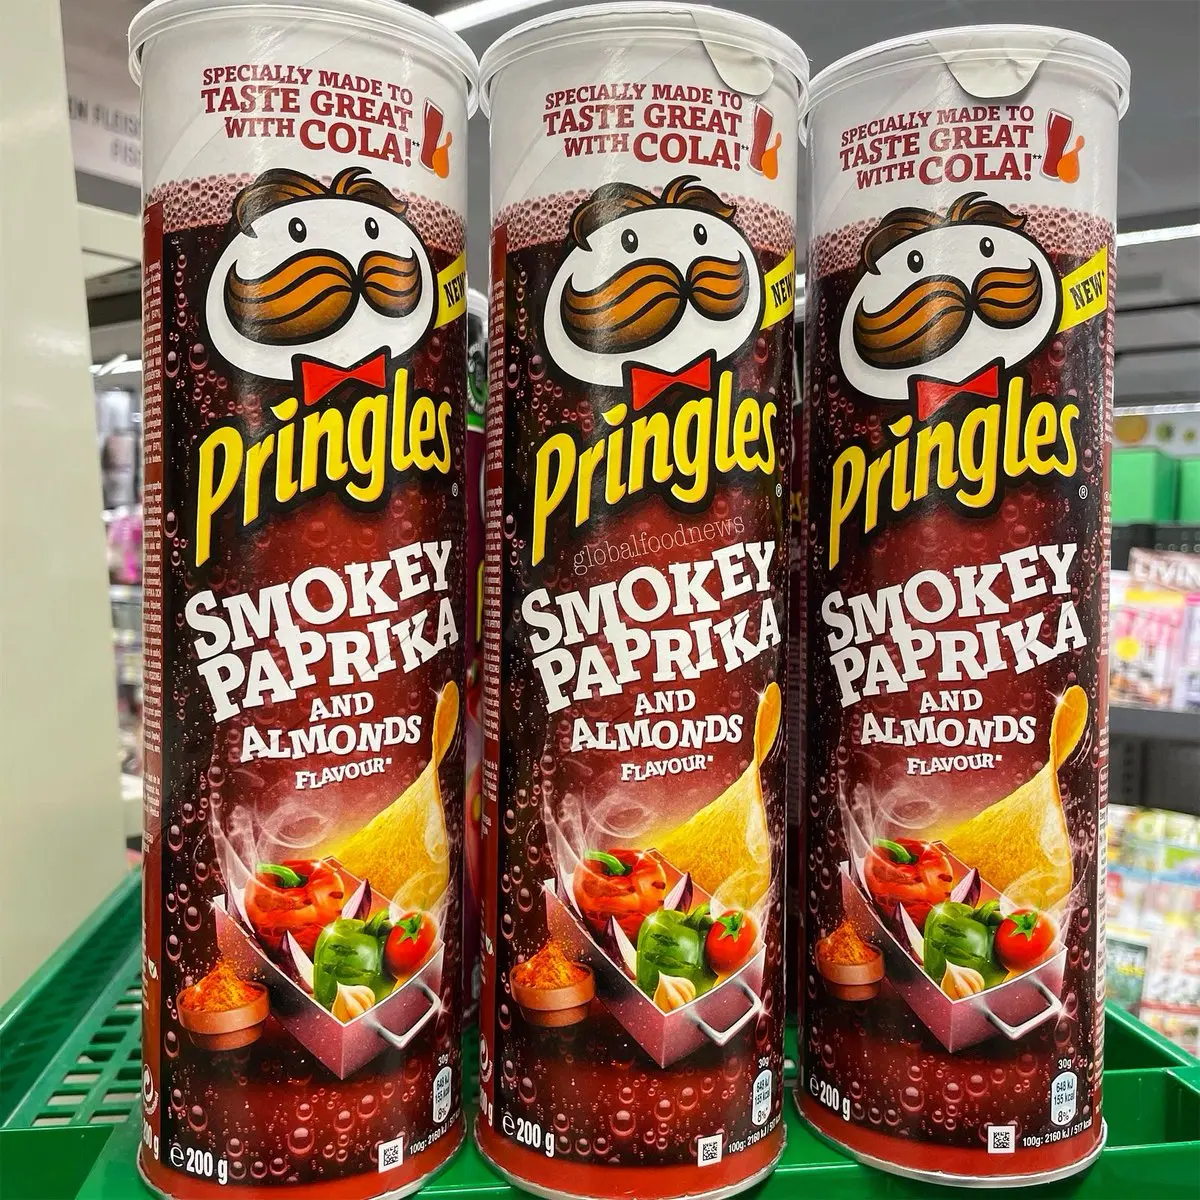 pringles smoked paprika and almonds - What countries are Pringles paprika available in